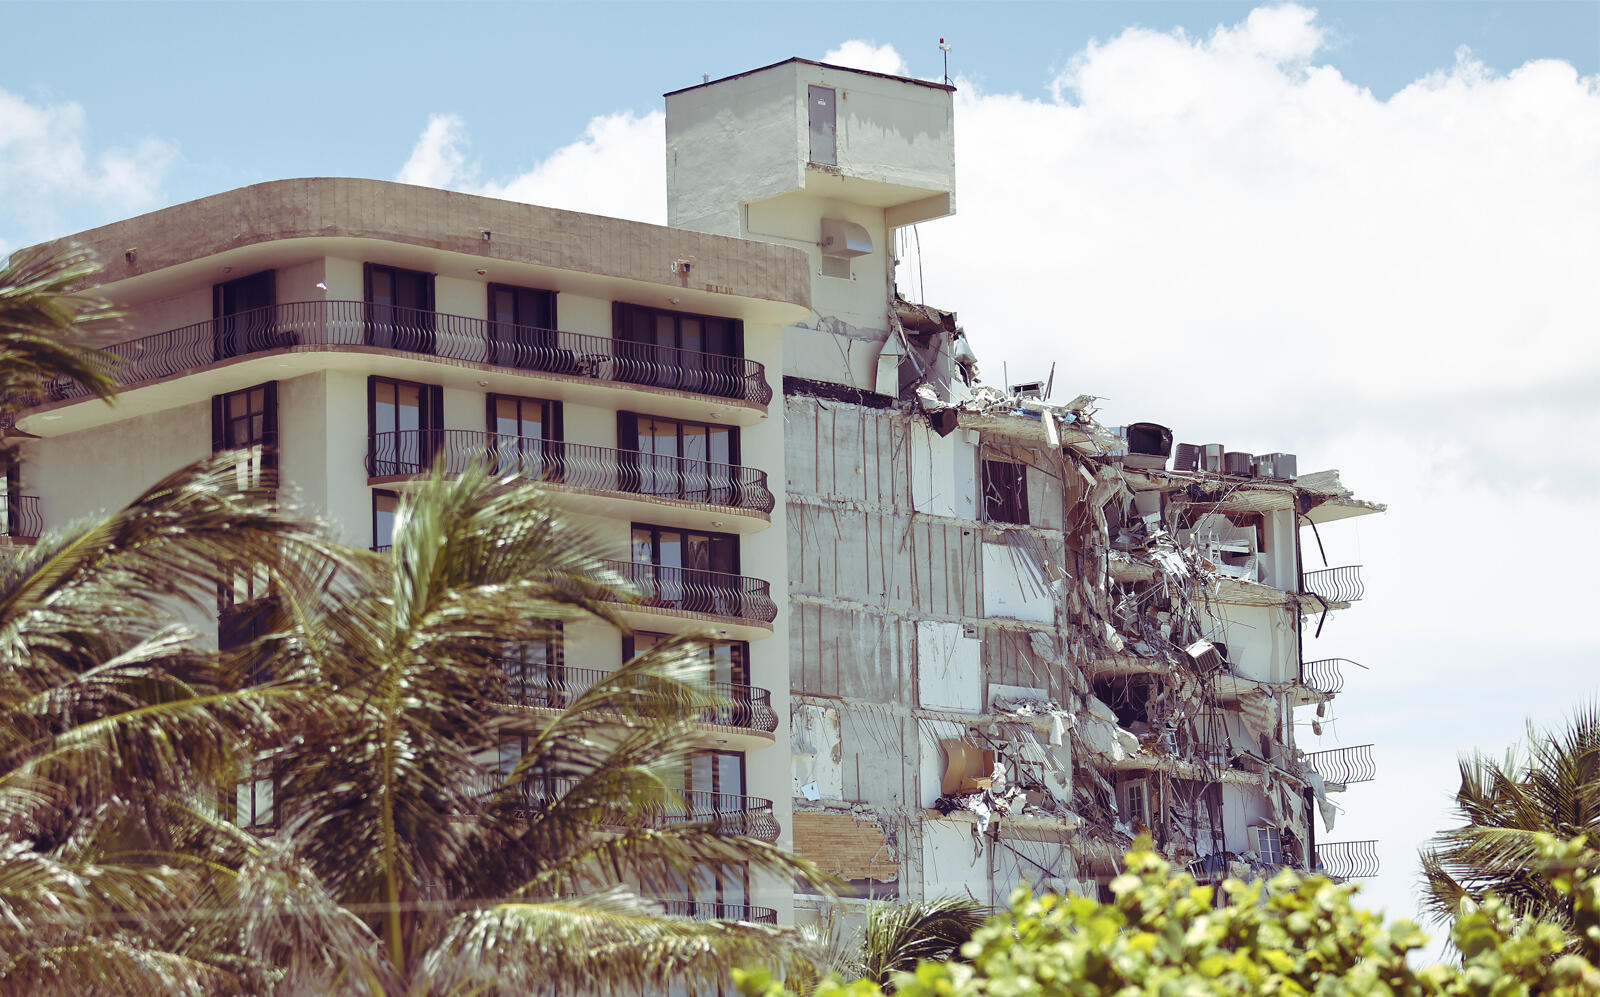 Champlain Towers South, before it was demolished late Sunday. The condo association had requested approvals from Surfside officials for repair work in the days leading up to the partial collapse. (Getty)